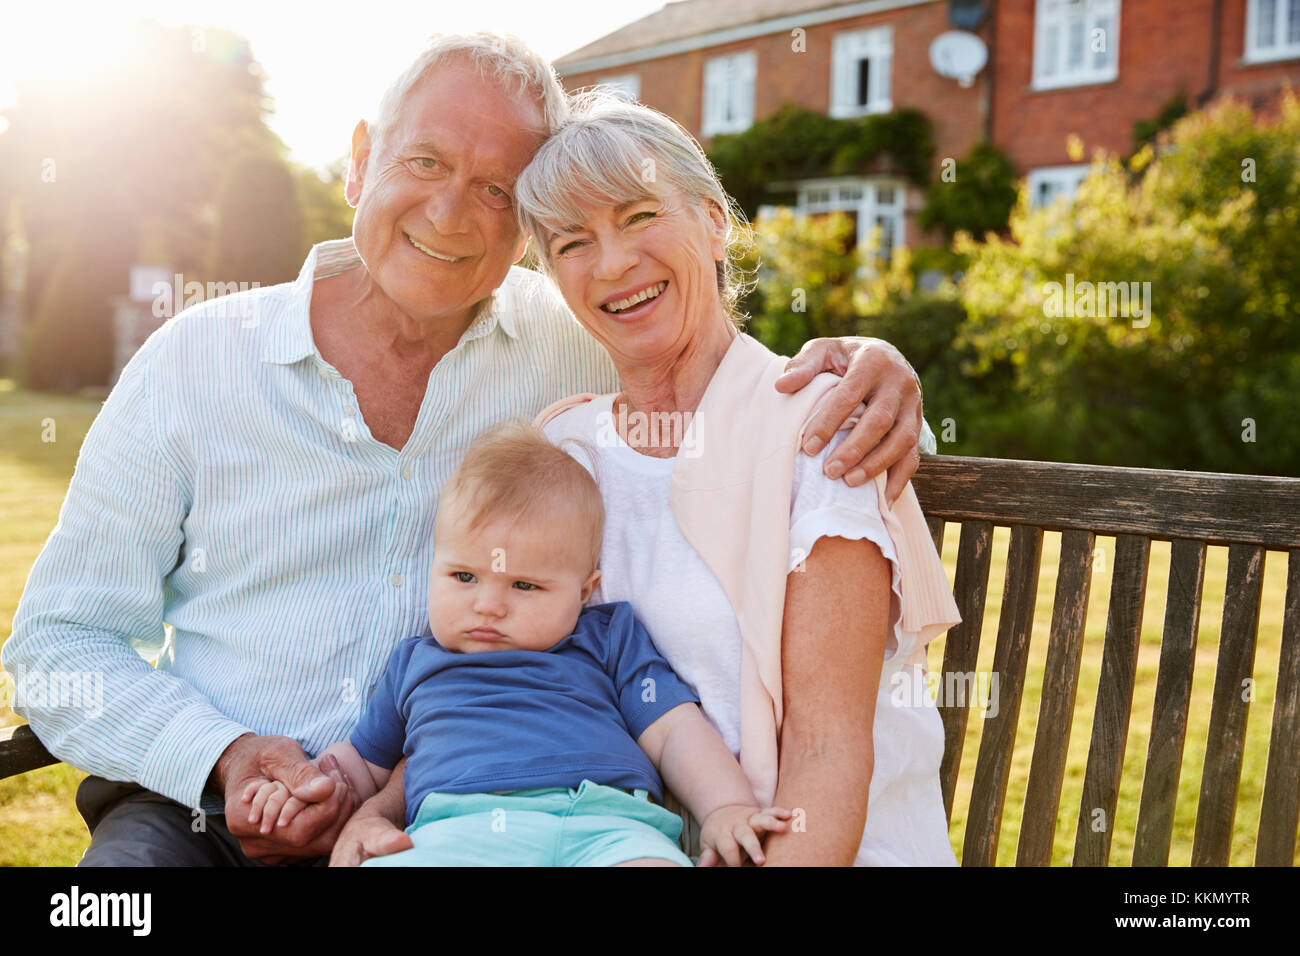 Grandparents Sitting On Seat In Garden With Baby Grandson Stock Photo